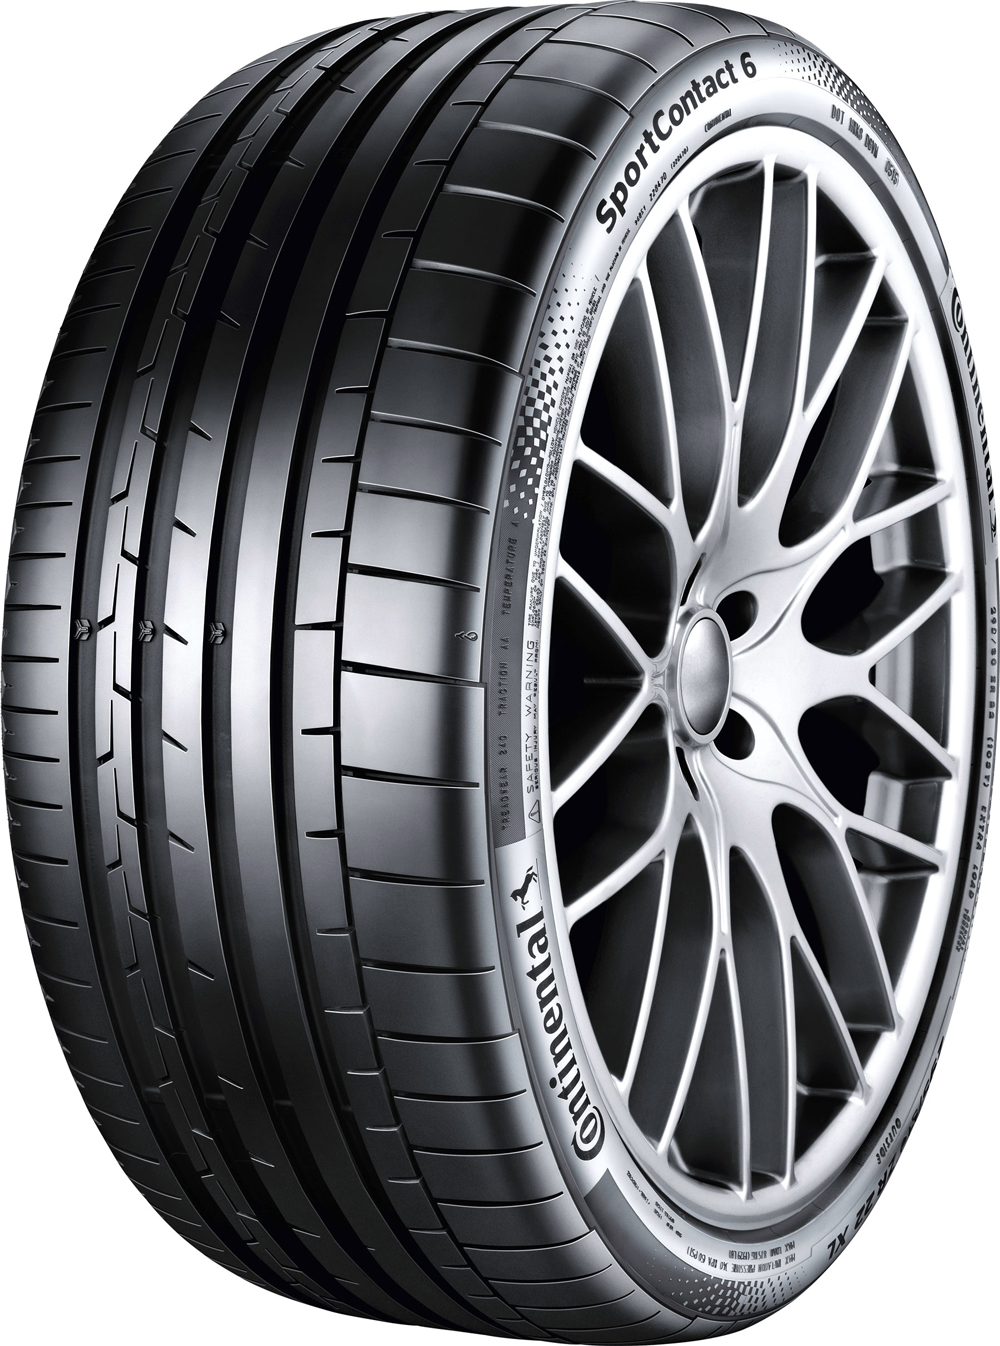 Гуми за кола CONTINENTAL SportContact 6 ContiSilent XL AUDI 255/40 R20 101Y